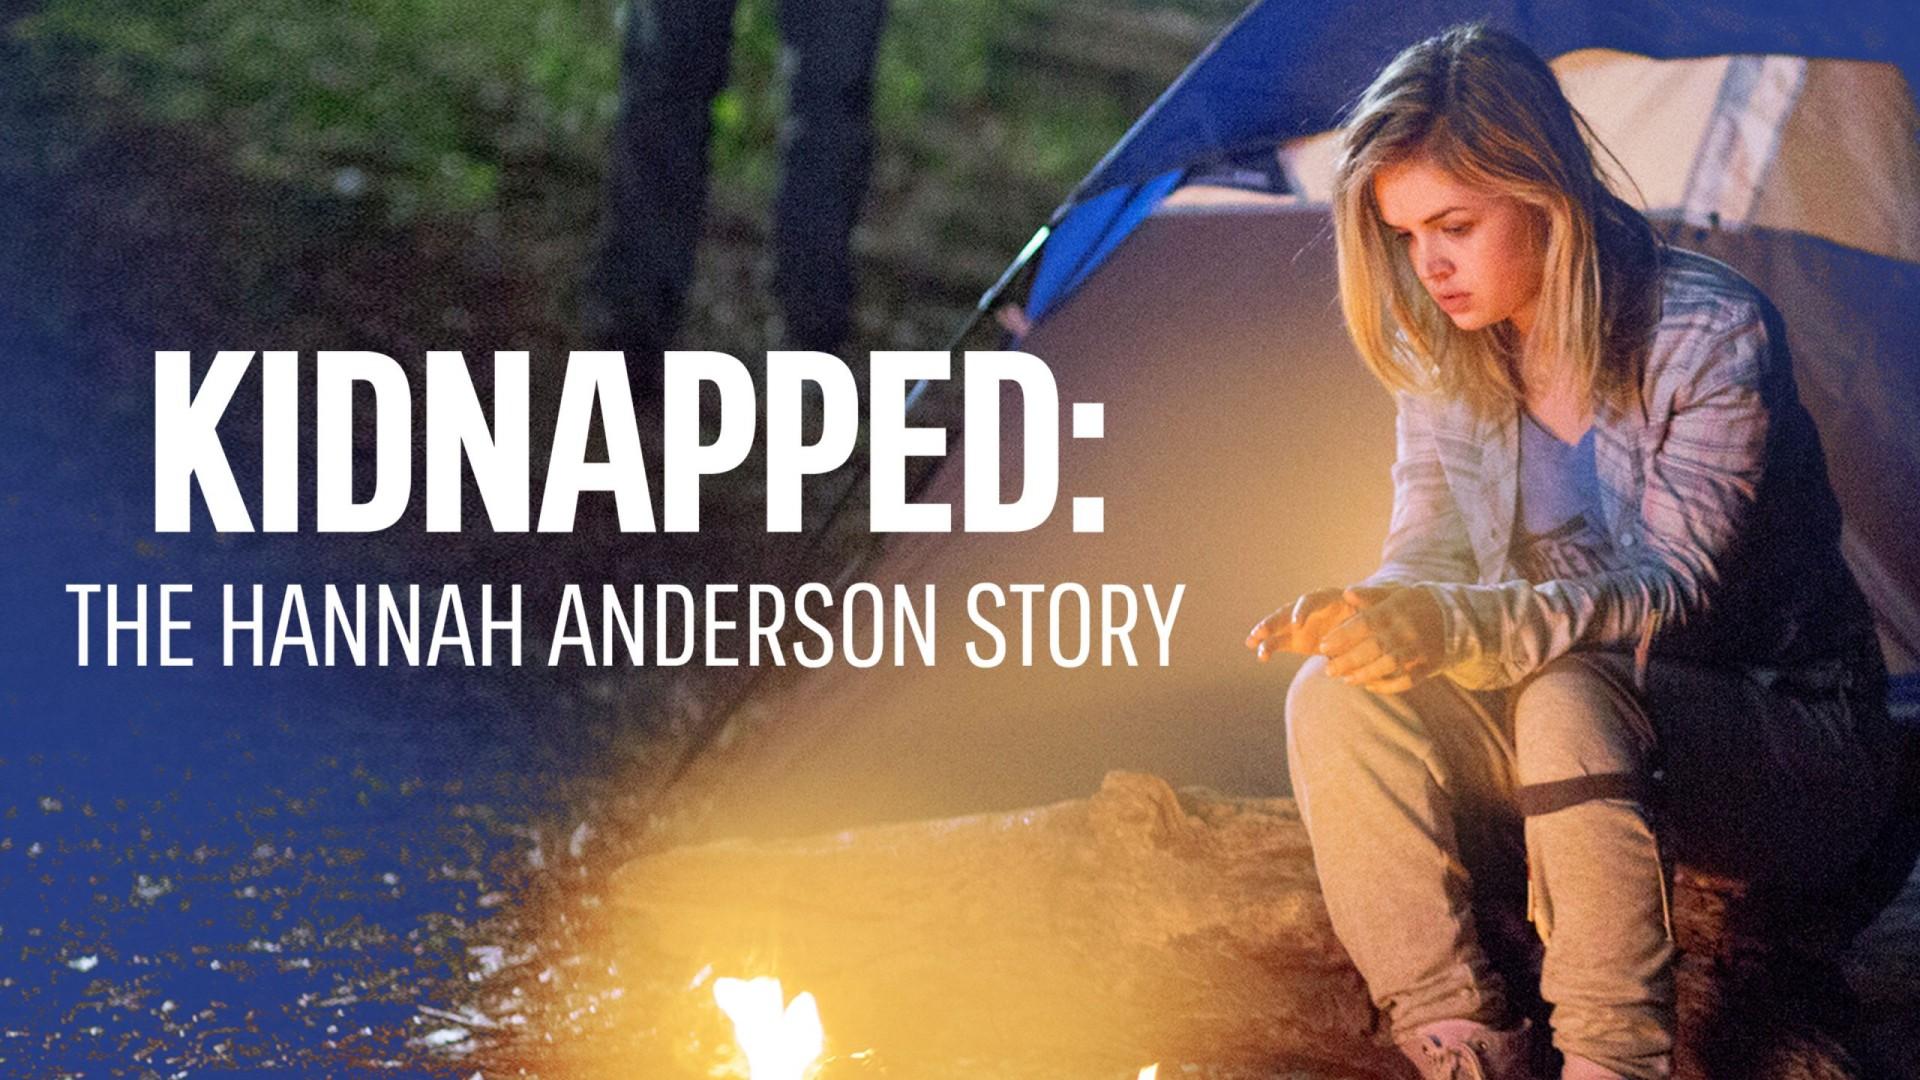 Kidnapped: The Hannah Anderson Story